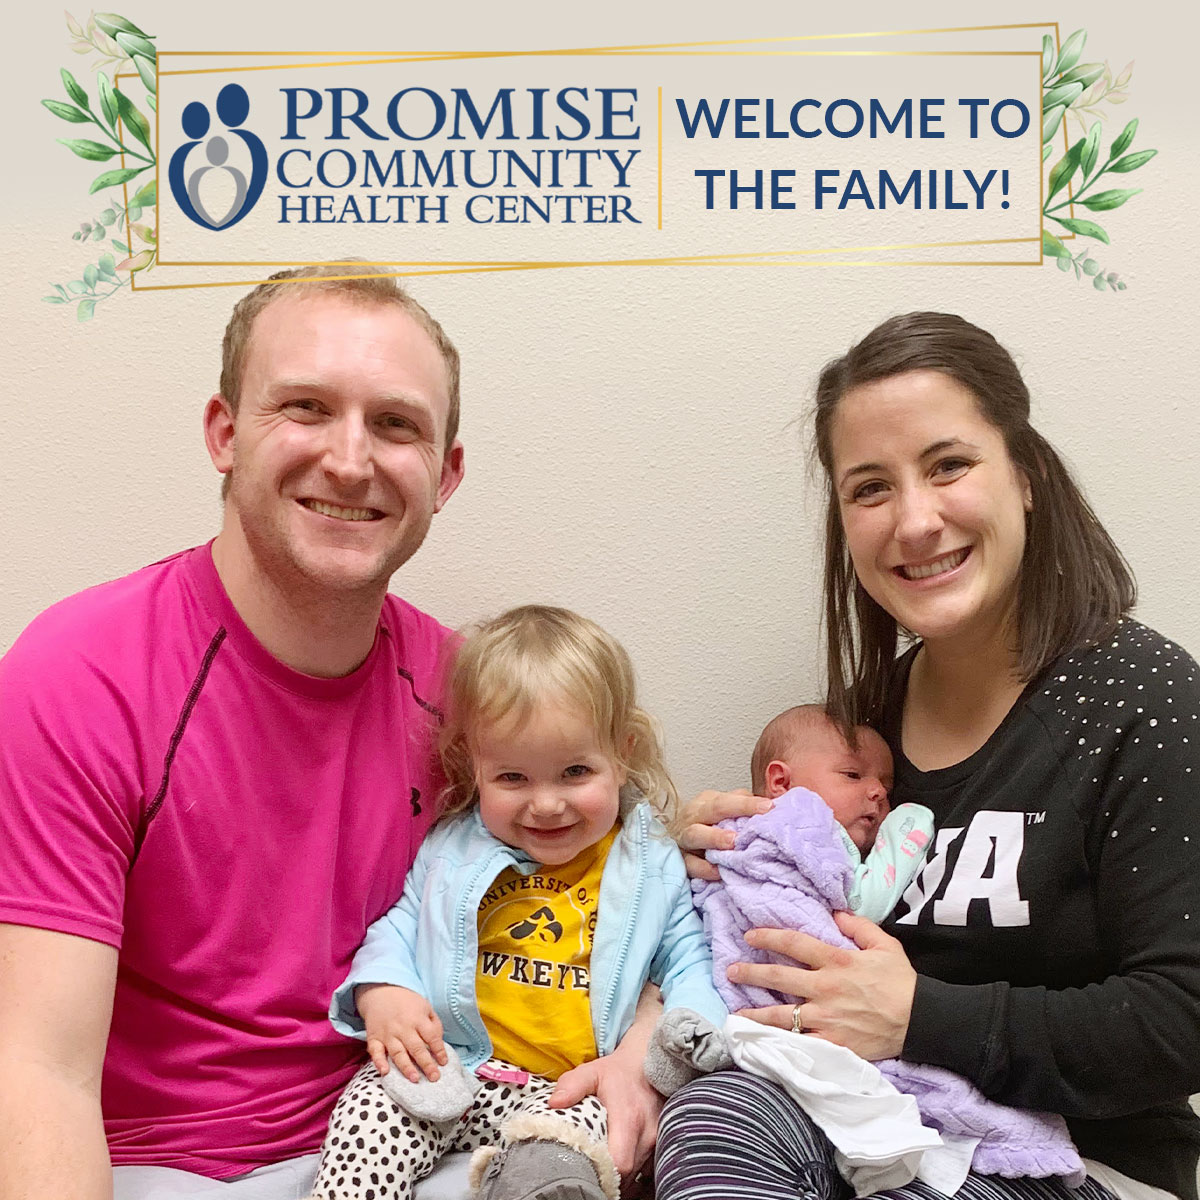 Hanson family from Sioux City Iowa, Home birth | Promise Community Health Center in Sioux Center, Iowa | Home births in northwest Iowa, Home births in southeast South Dakota, Home births in southwest Minnesota | Home births in Sioux Falls South Dakota, Home births in Beresford South Dakota, Home births in Sioux City IA, Home births in LeMars IA, Home births in Worthington MN, Home births in Iowa, Home births in South Dakota, Home births in Minnesota